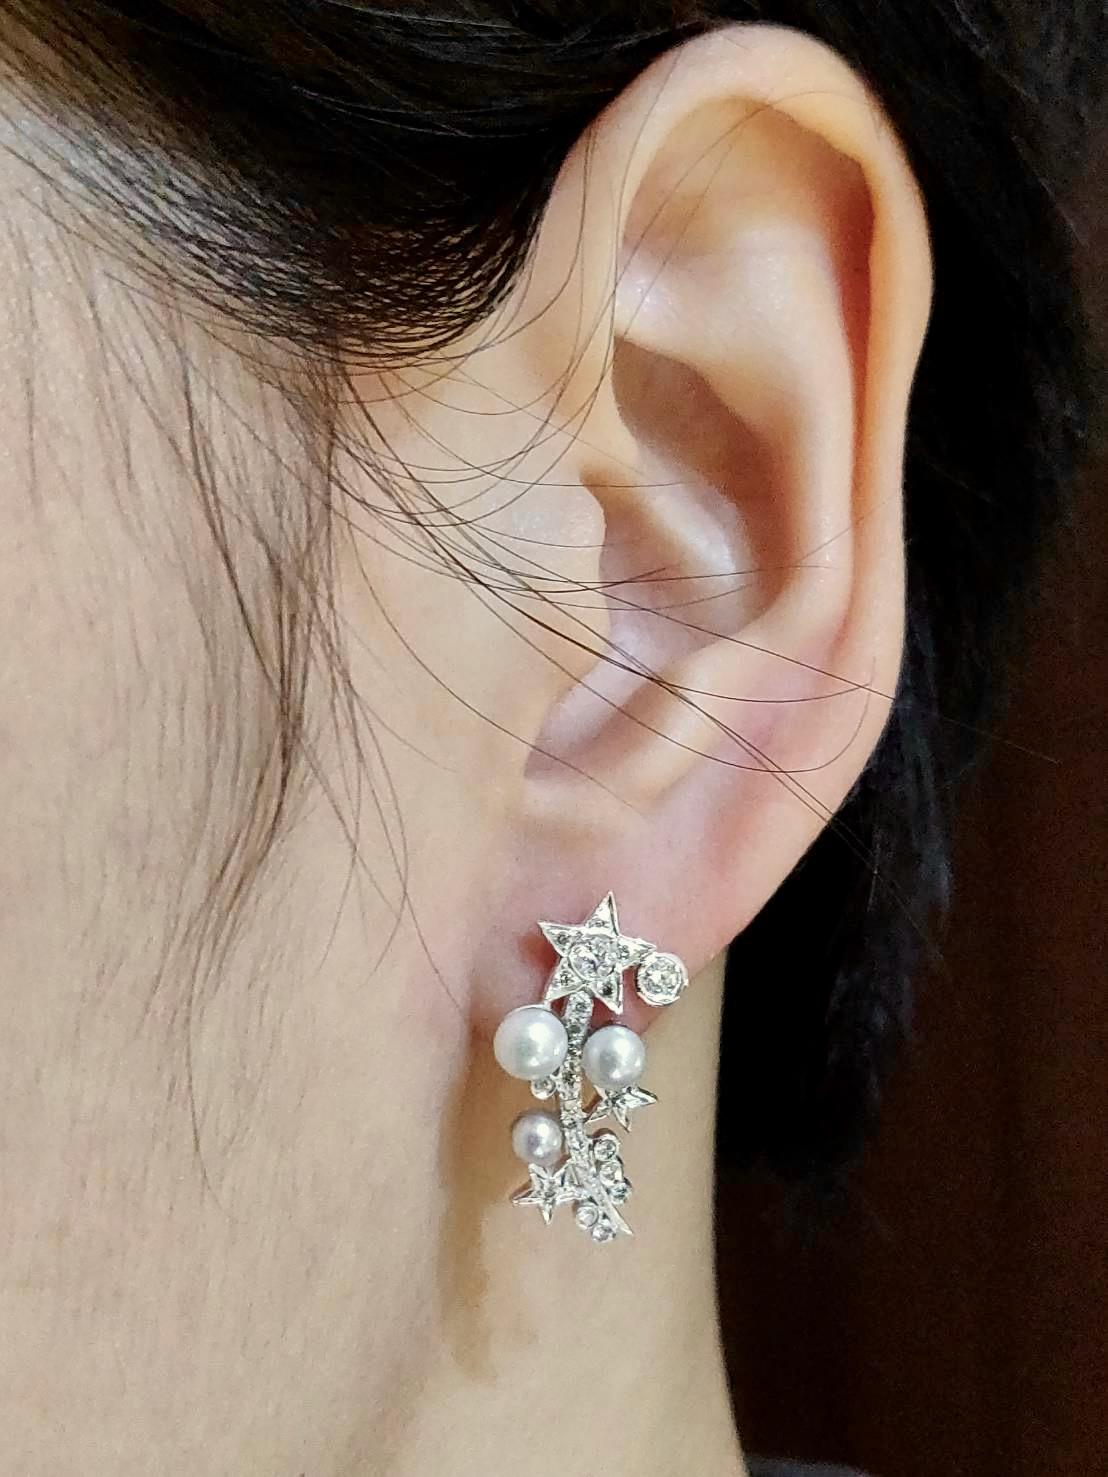 These starry earrings portray a bright star moving swiftly in space full of sparkling stars and pearly planets.

The earrings can be worn traditionally like little dangle earrings or in middle of the lobes along antitragus away from the edge.

Gold: